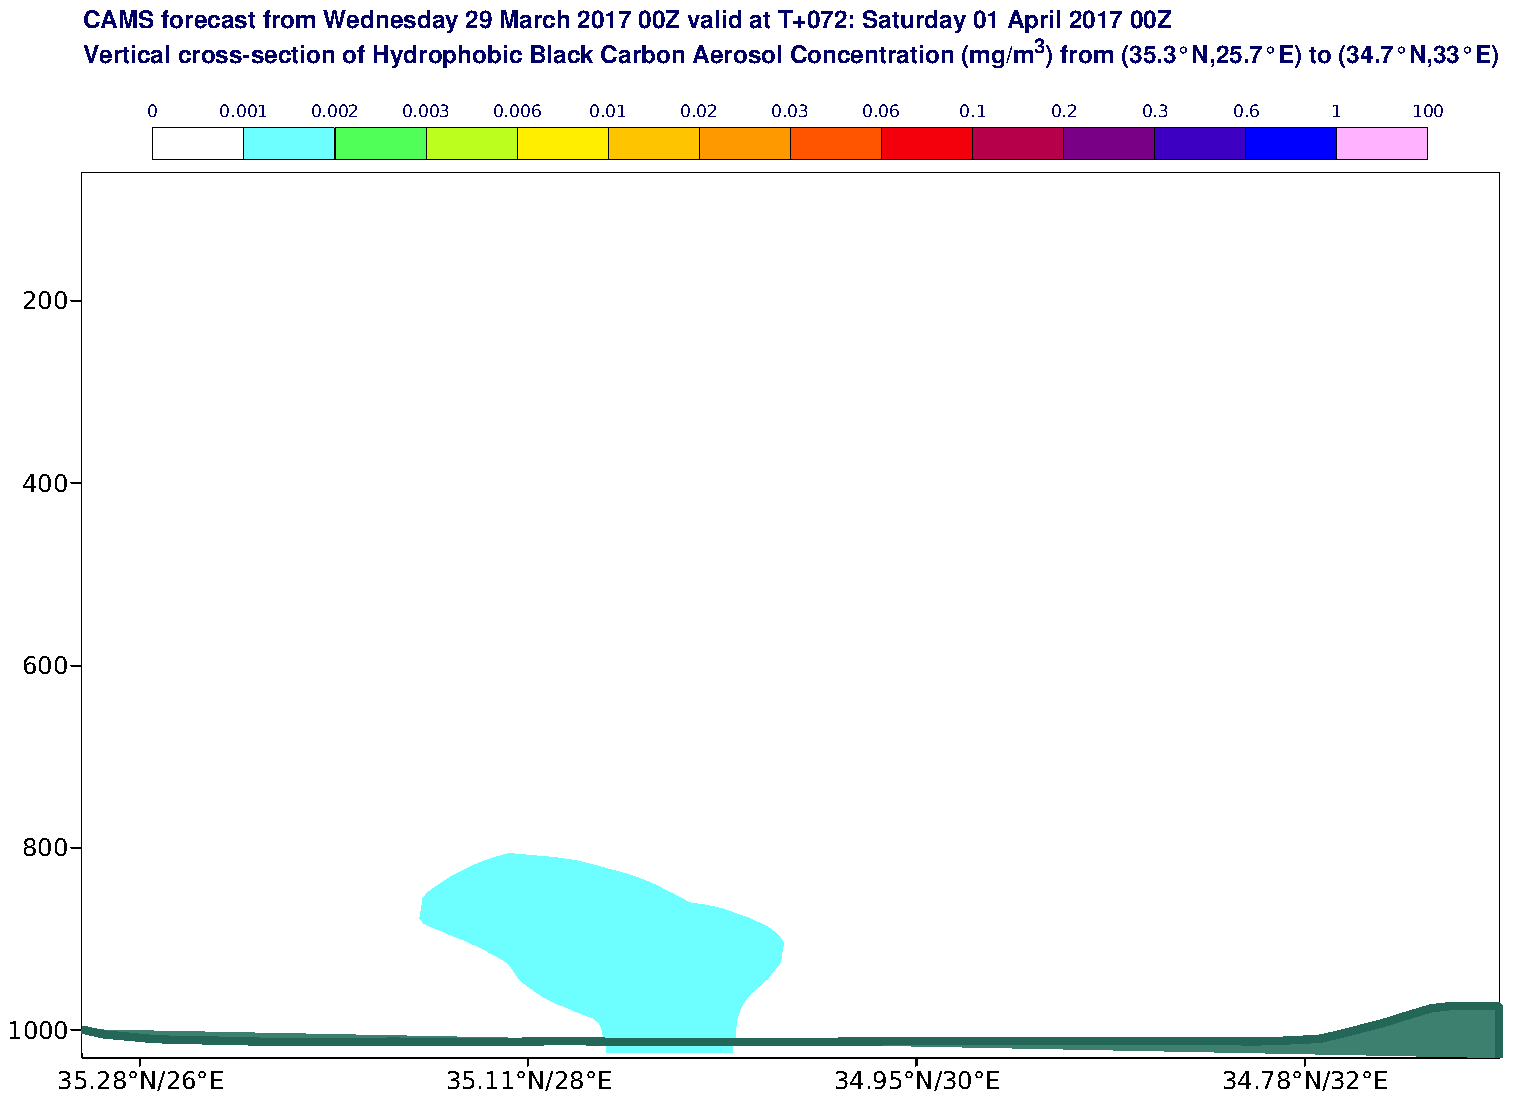 Vertical cross-section of Hydrophobic Black Carbon Aerosol Concentration (mg/m3) valid at T72 - 2017-04-01 00:00